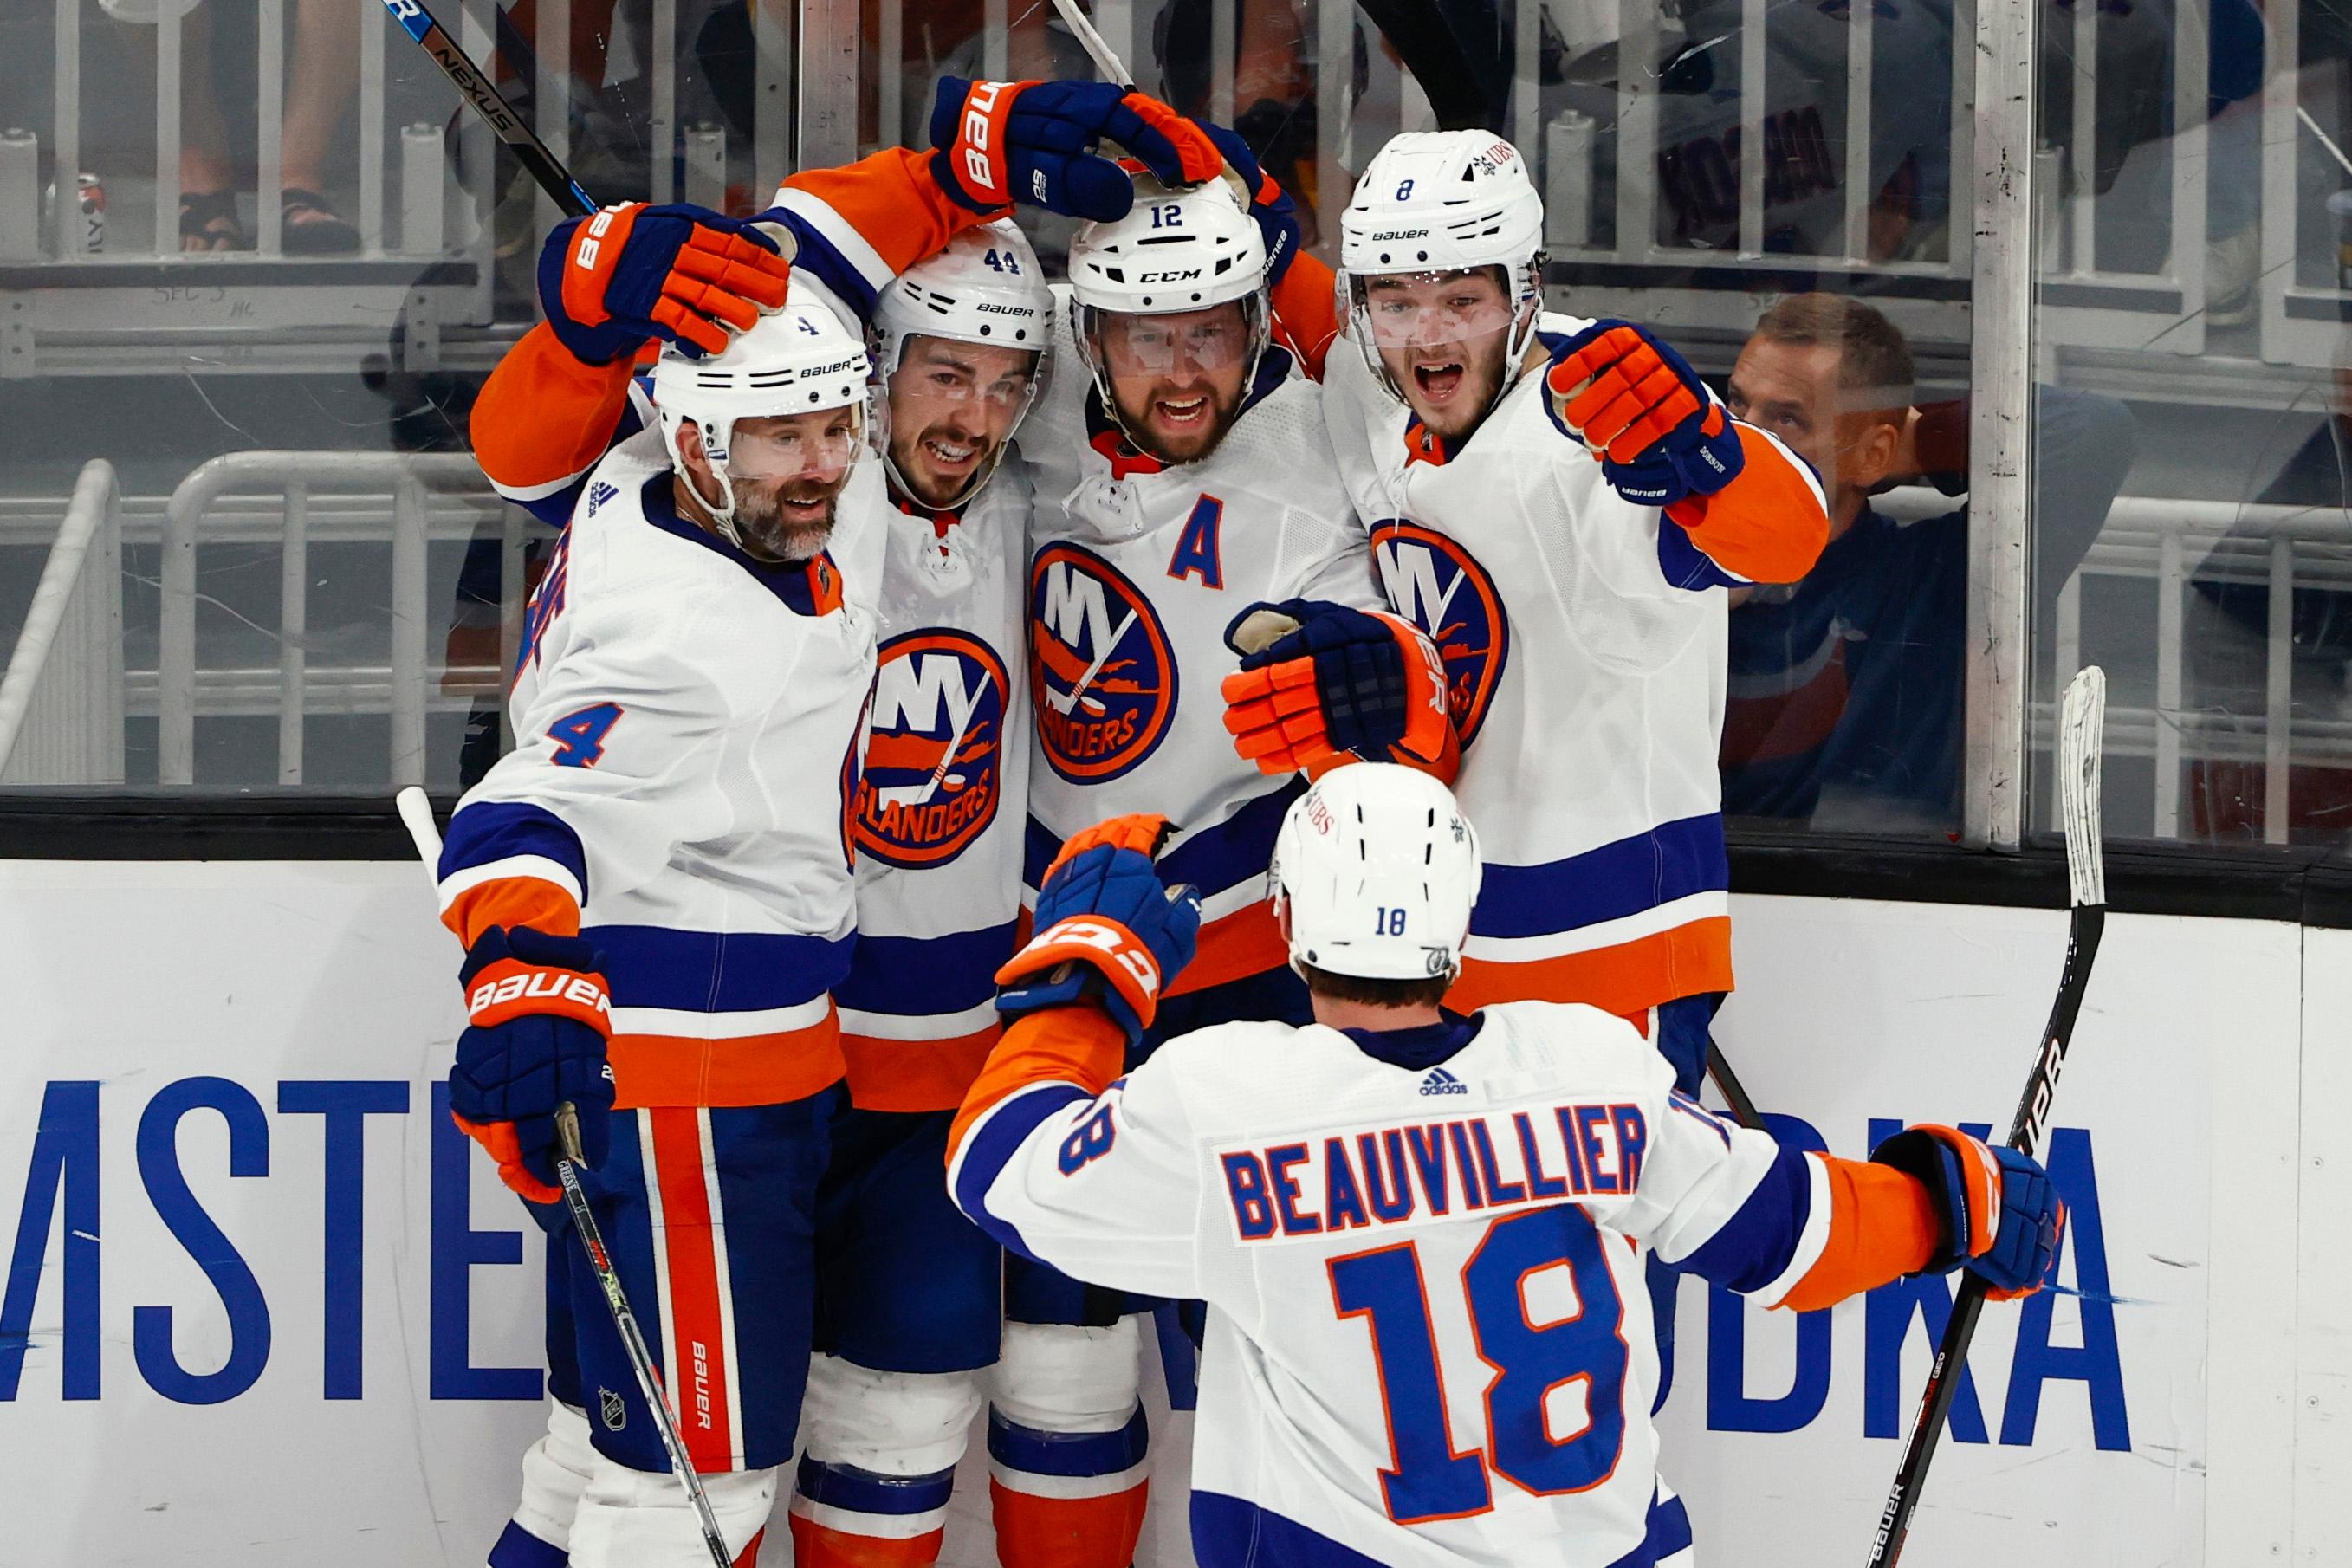 Jun 7, 2021; Boston, Massachusetts, USA; New York Islanders center Josh Bailey (12) celebrates his goal against the Boston Bruins with defenseman Robin Salo (4), center Jean-Gabriel Pageau (44), defenseman Noah Dobson (8) and left wing Anthony Beauvillier (18) during the second period of game five of the second round of the 2021 Stanley Cup Playoffs at TD Garden. Mandatory Credit: Winslow Townson-USA TODAY Sports / Winslow Townson-USA TODAY Sports